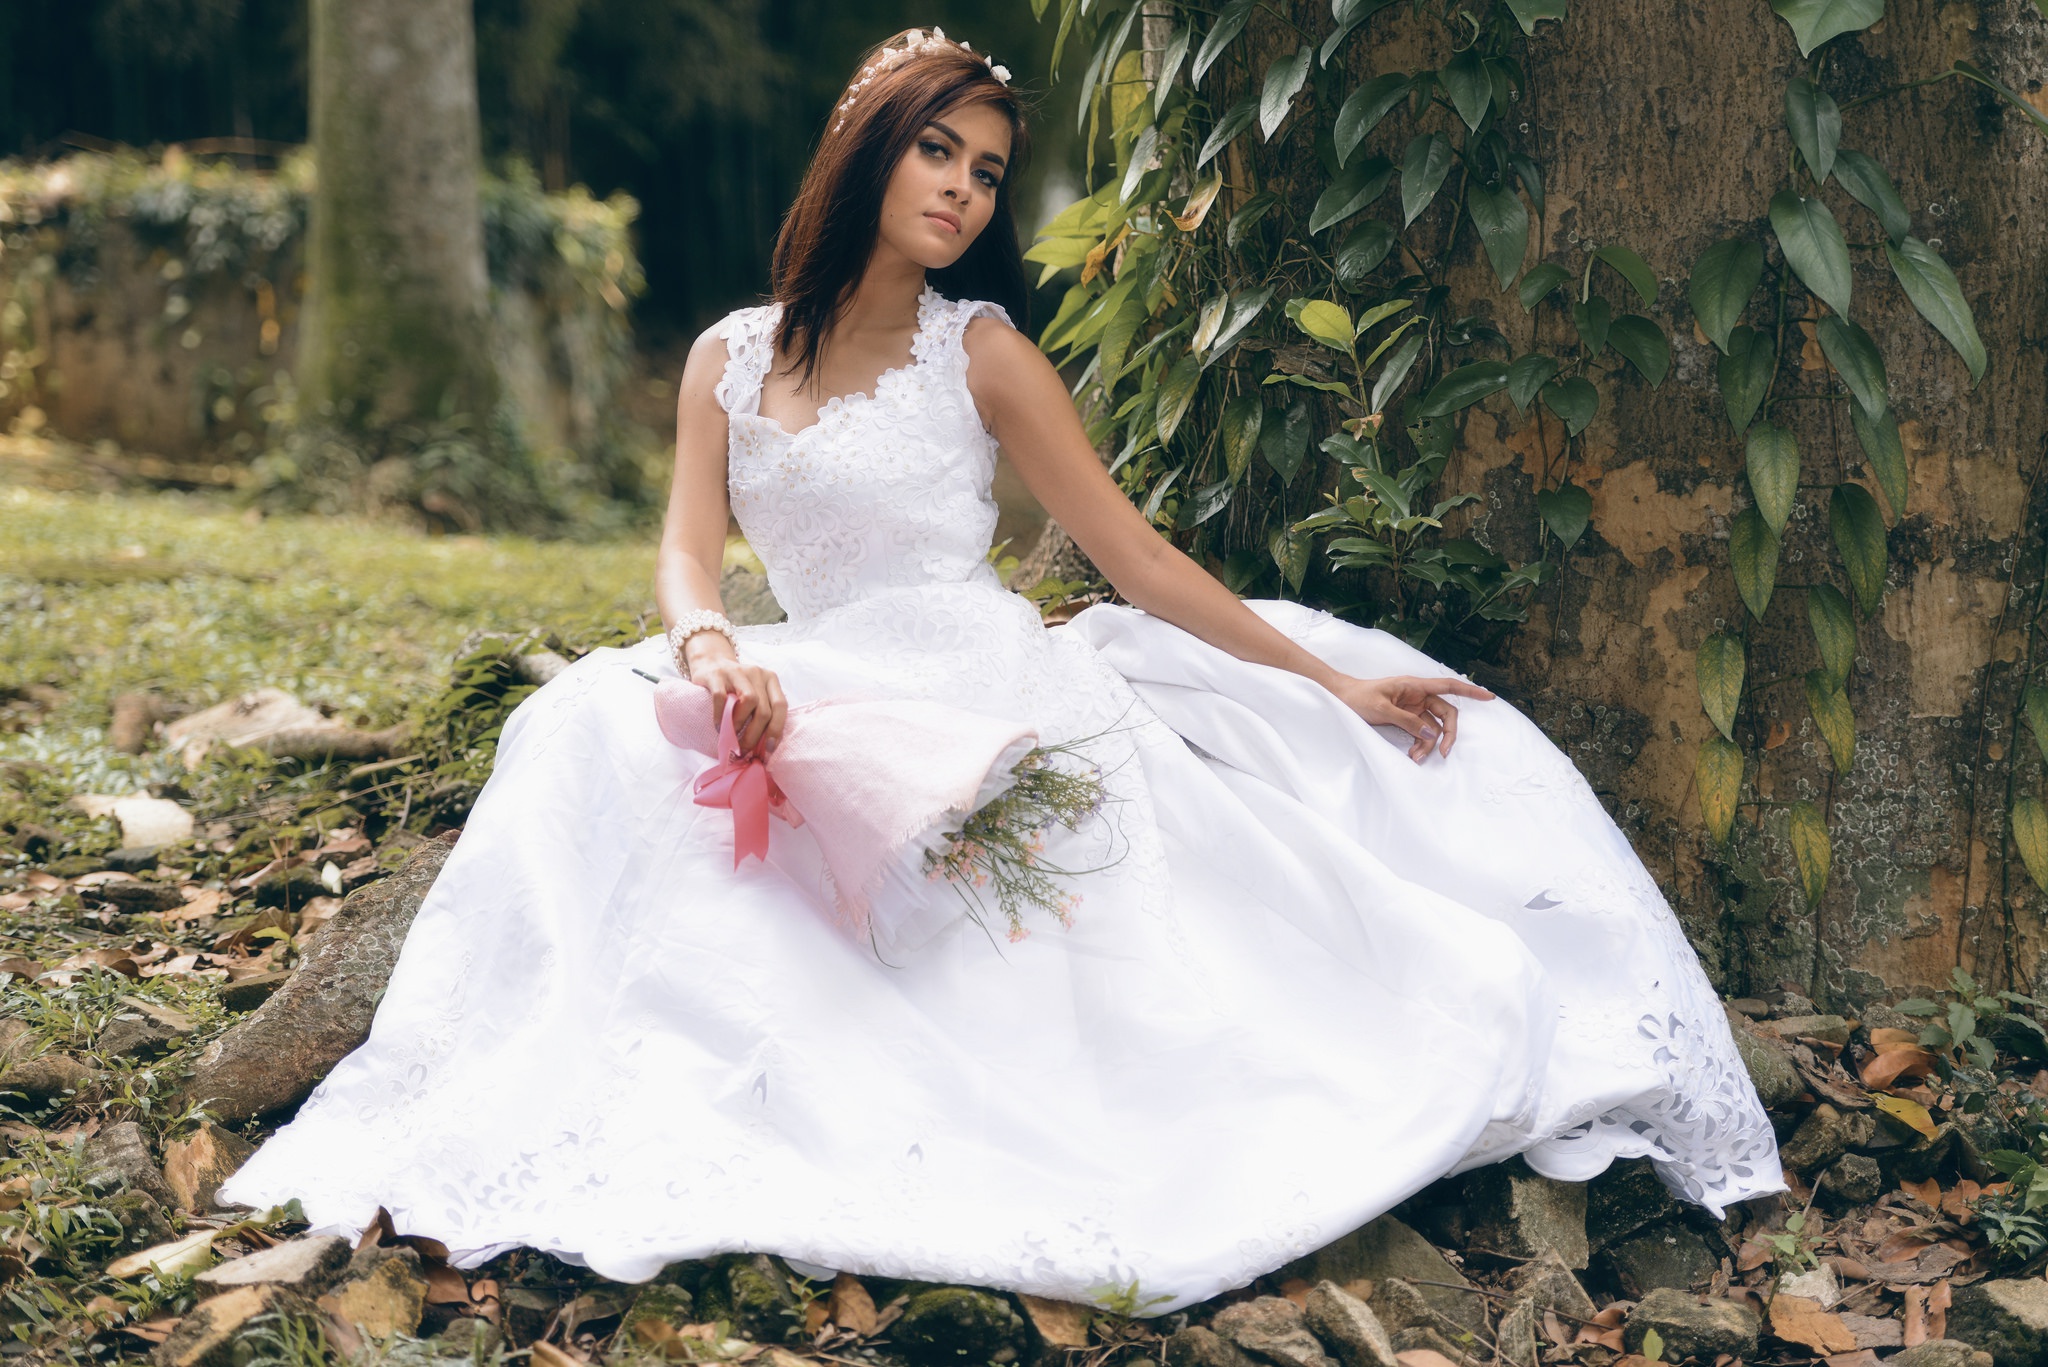  Wedding Dress Hd  The ultimate guide 